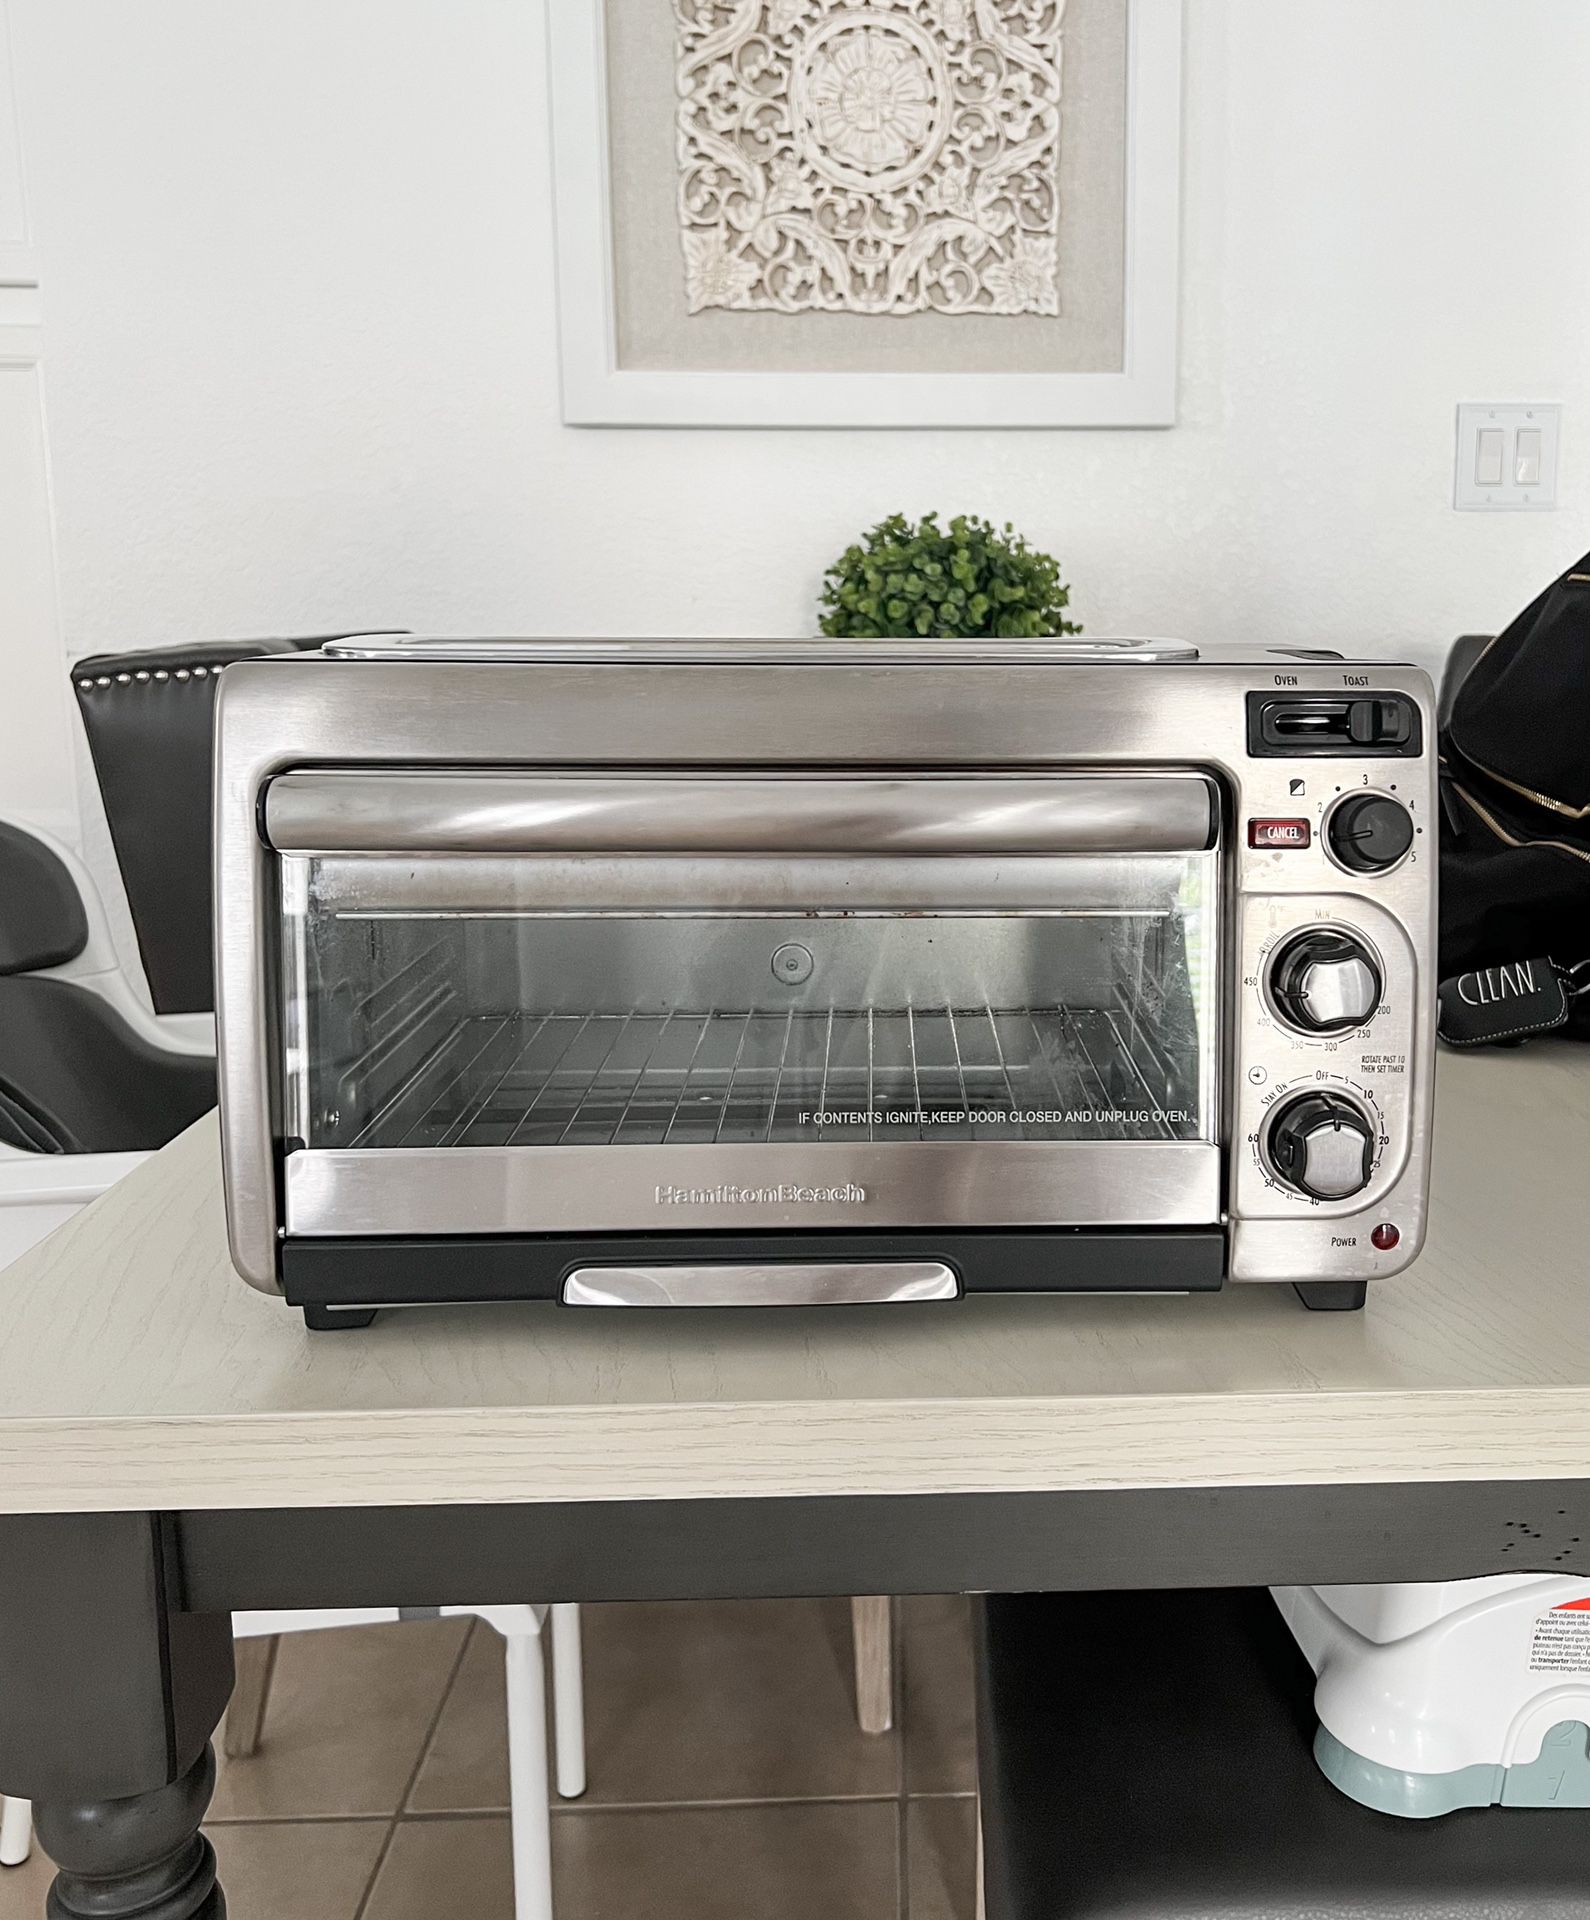 Hamilton Beach 2 in 1 Countertop Oven Dual Two Slice Toaster Stainless  Steel for Sale in Miami, FL - OfferUp